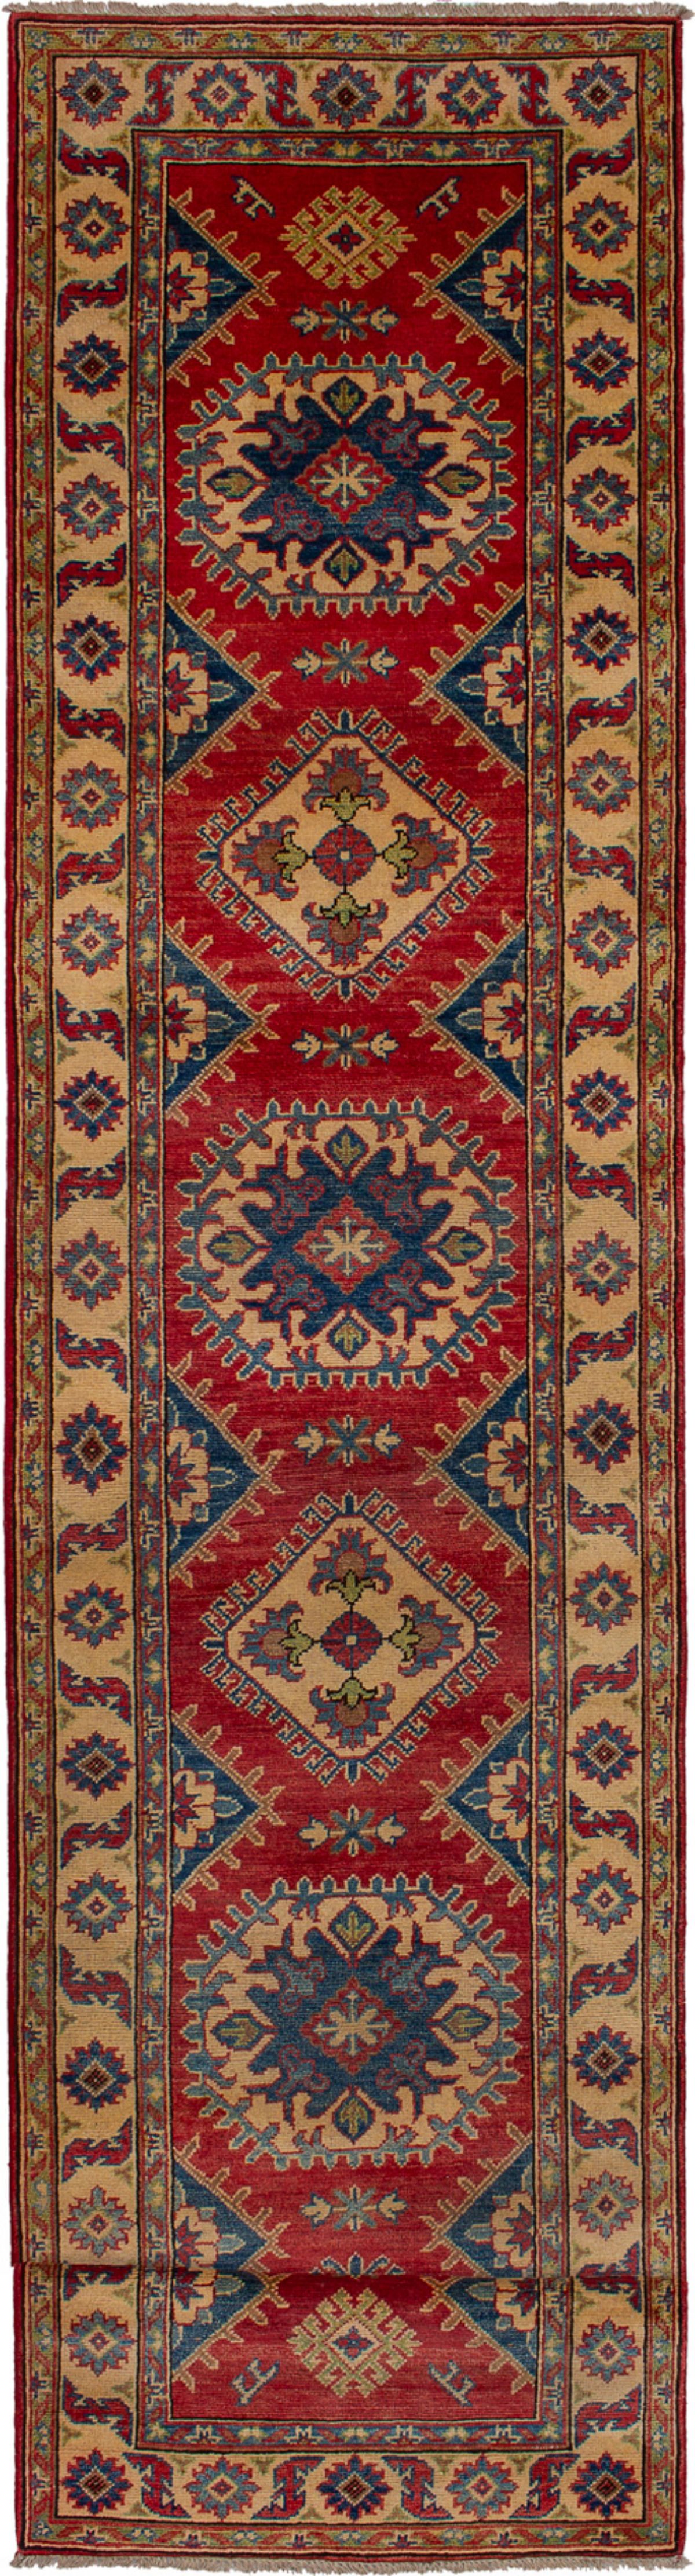 Hand-knotted Finest Gazni Red Wool Rug 2'7" x 19'2" Size: 2'7" x 19'2"  